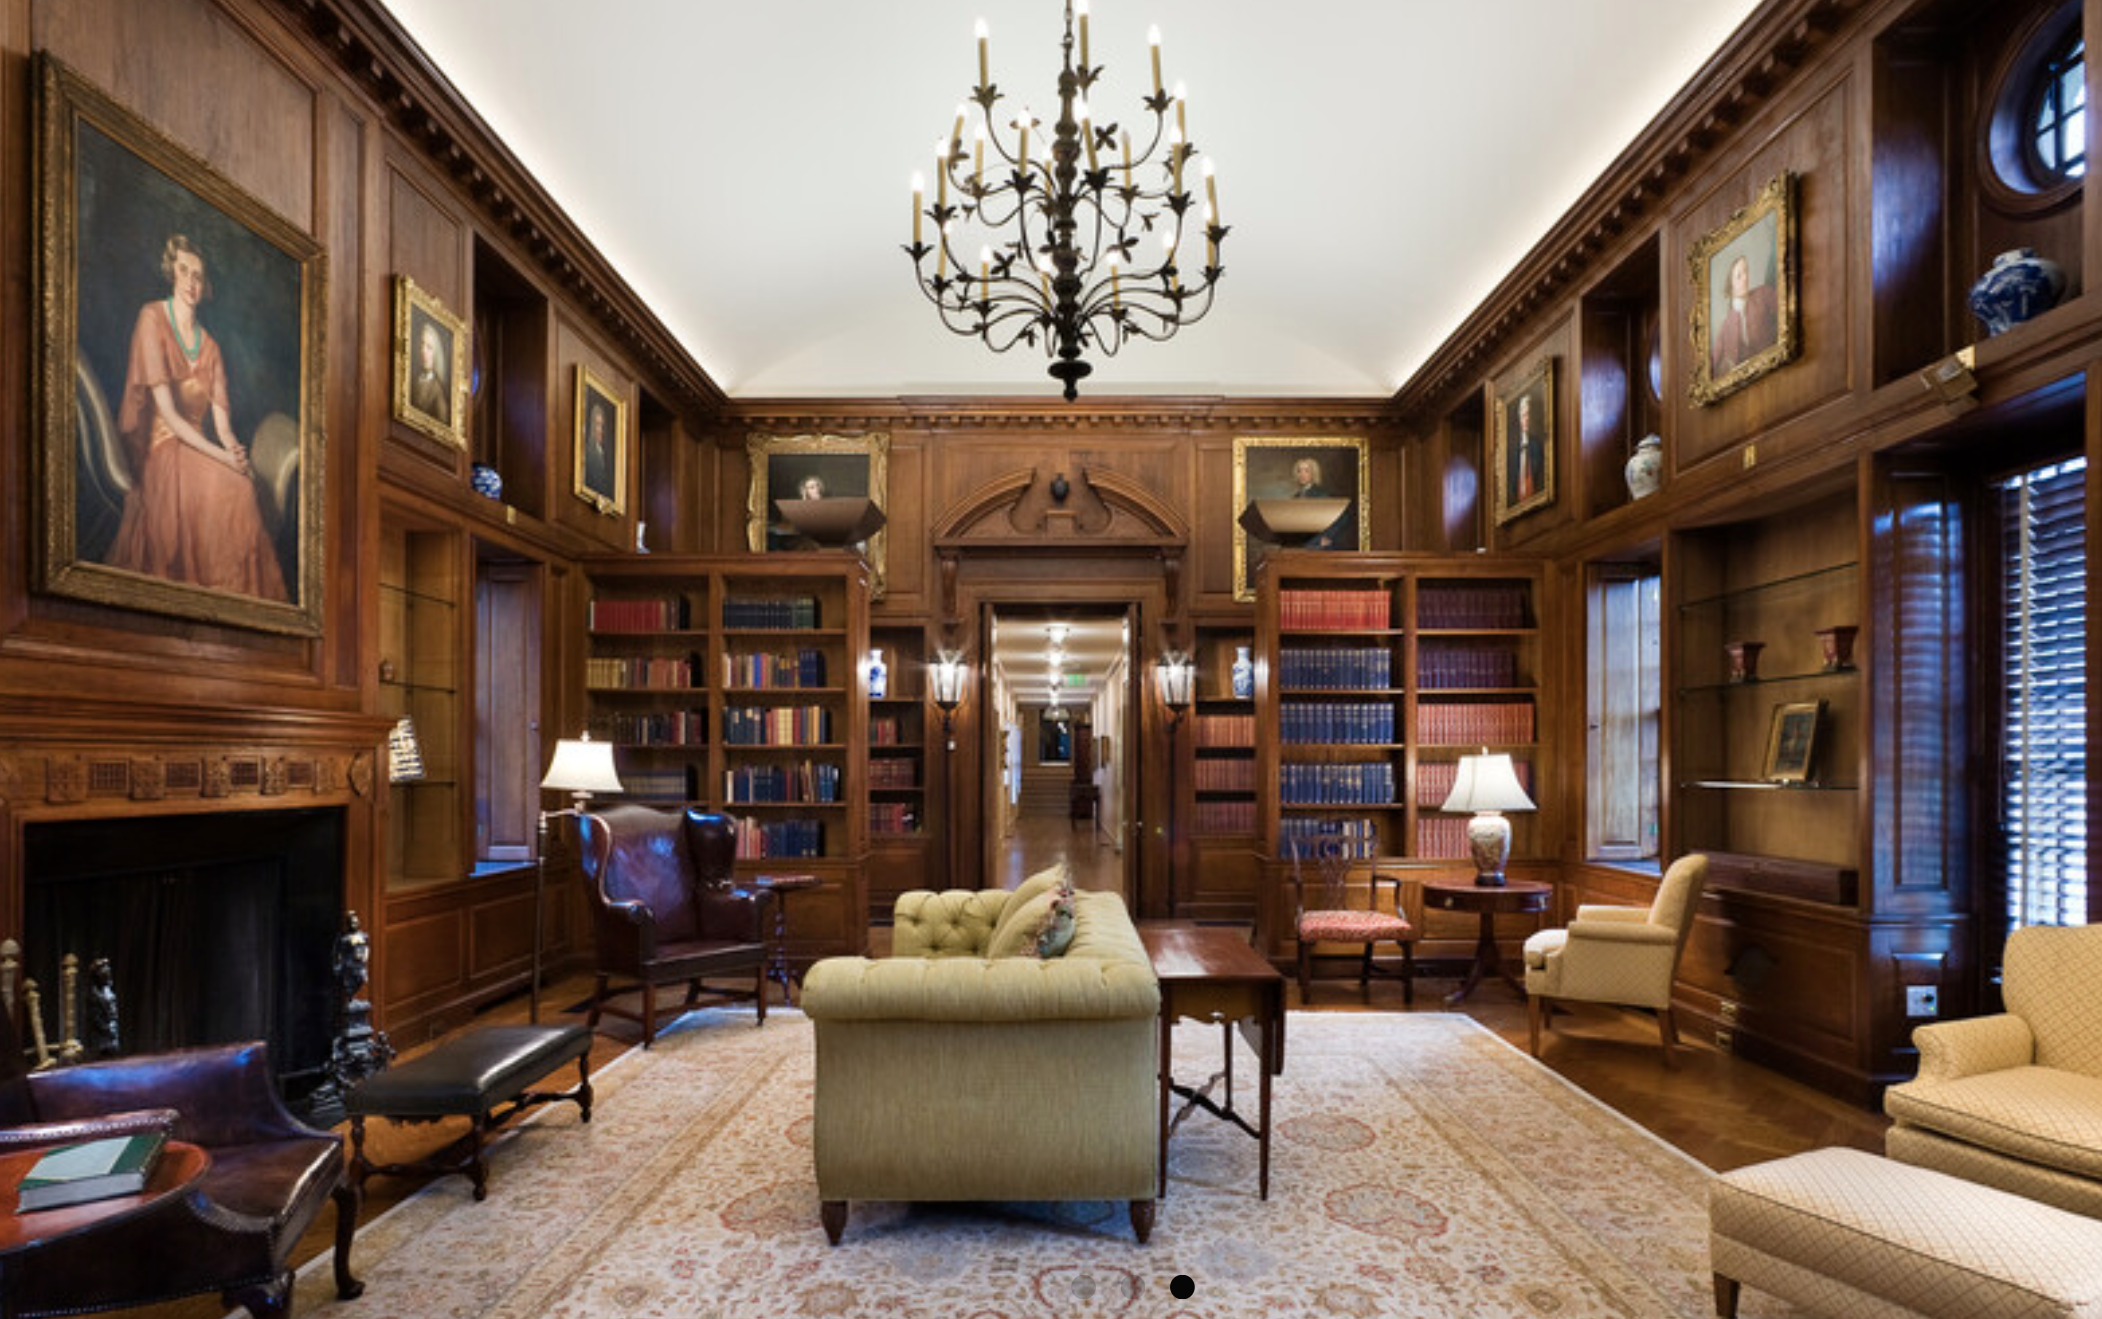 dark paneled high ceilinged library room lined with books cases and portraits and a sofa facing a fireplace.